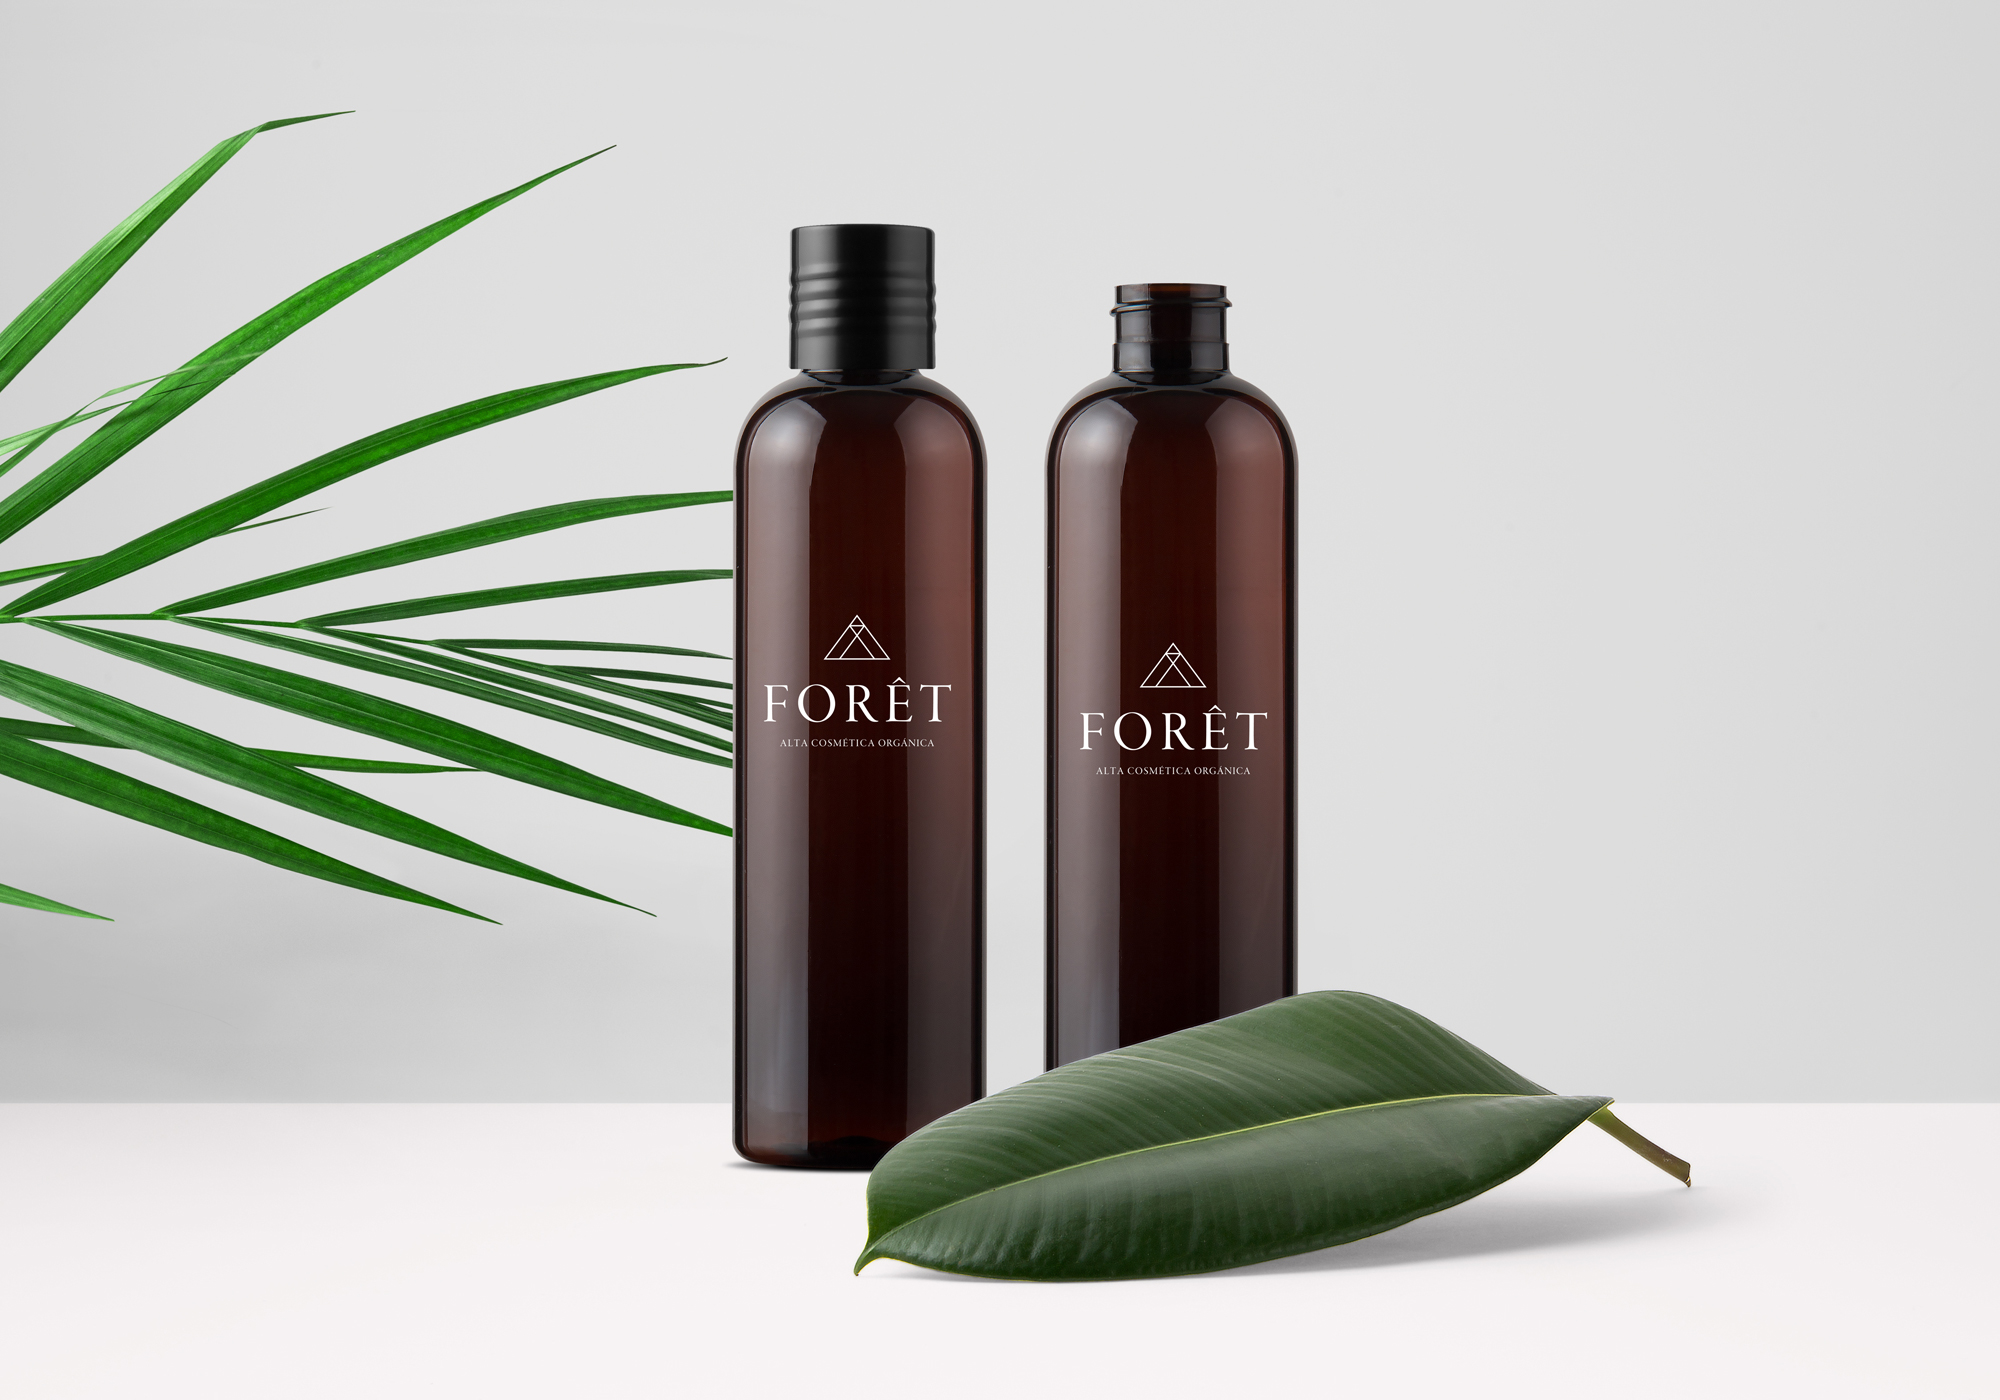 Foret Cosmeticos